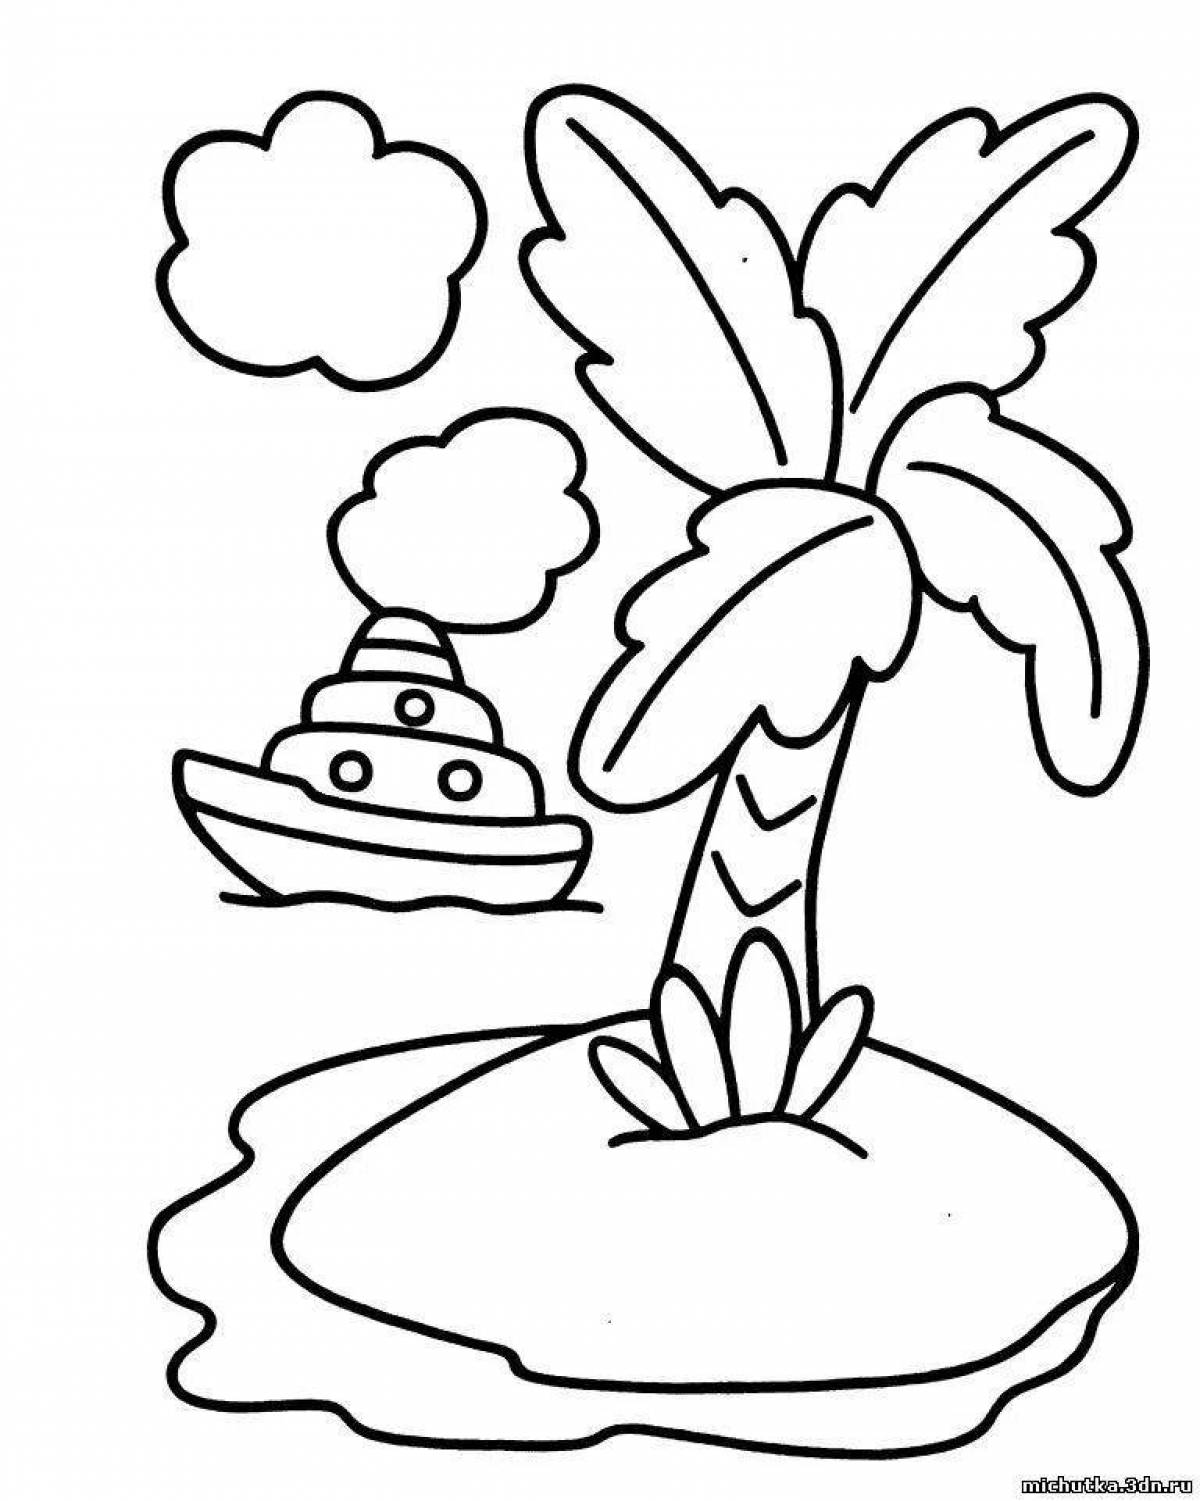 Joyful coloring pages for children 4-5 years old